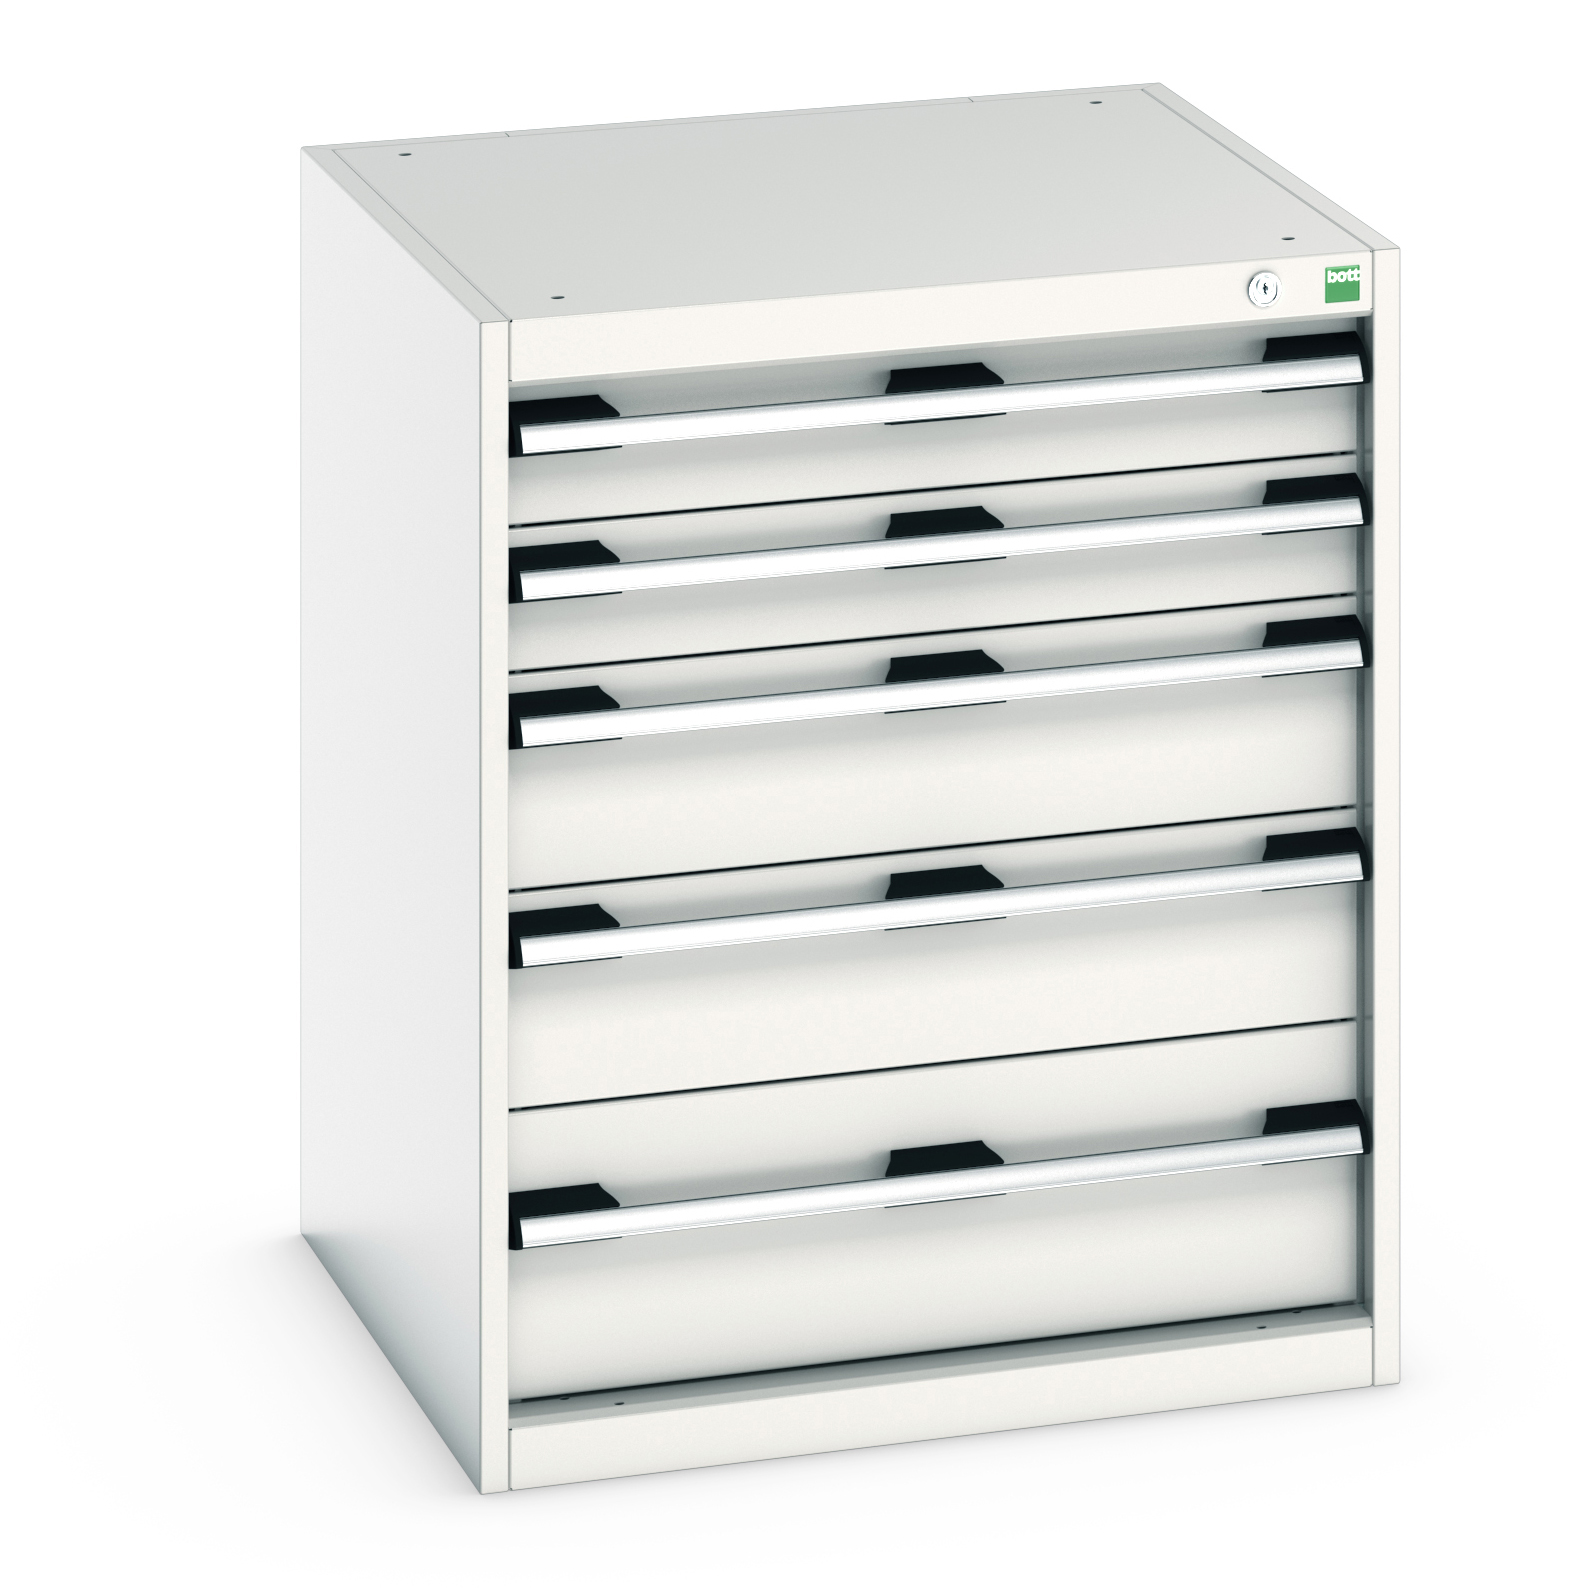 Bott Cubio Drawer Cabinet With 5 Drawers - 40019035.16V